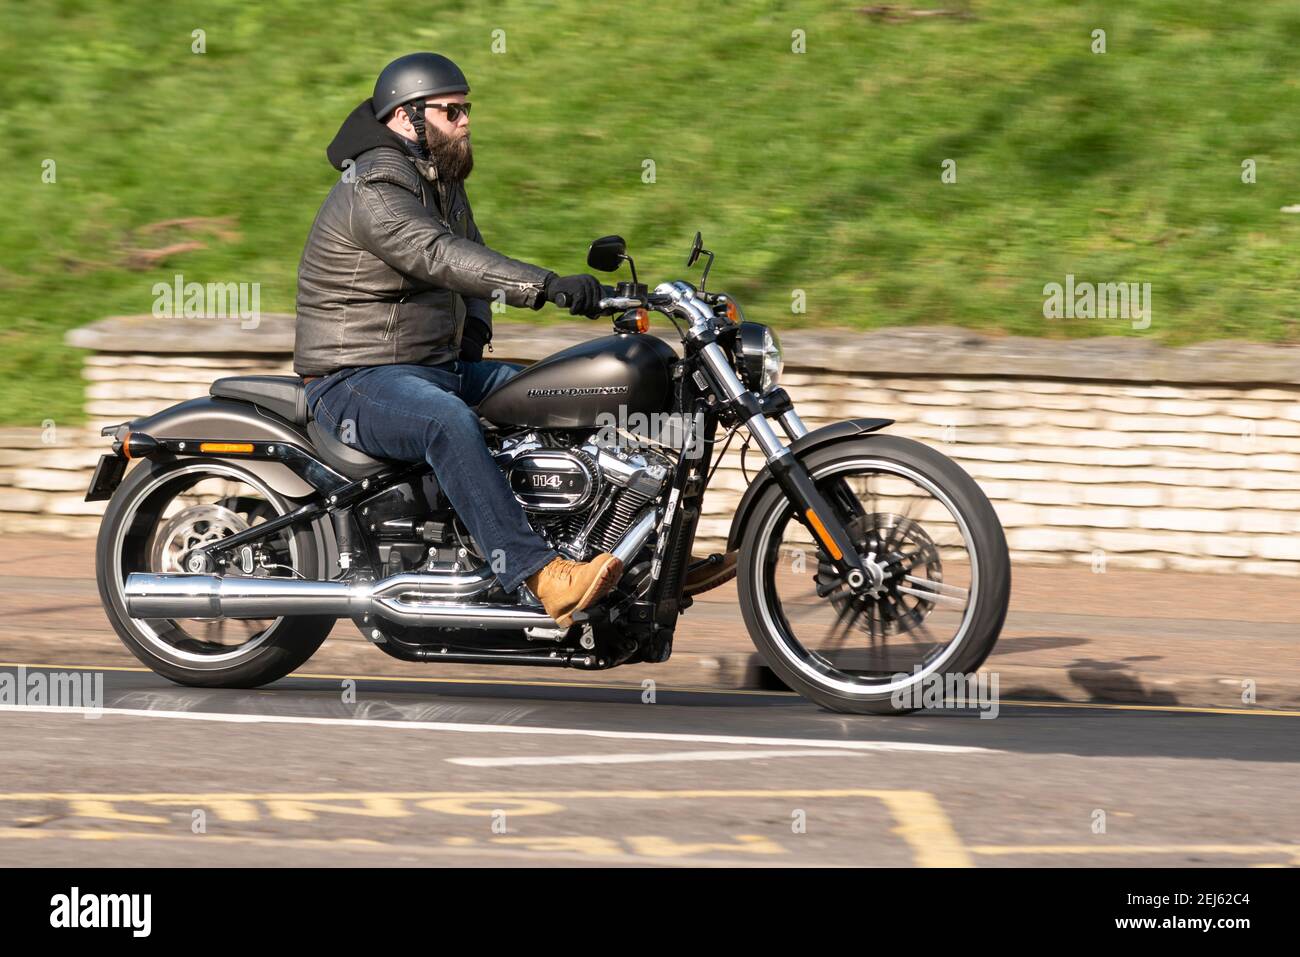 Harley Davidson 114 cubic inches motorcycle being ridden in Southend on Sea, Essex, UK, on a bright sunny winter day, during COVID 19 lockdown Stock Photo